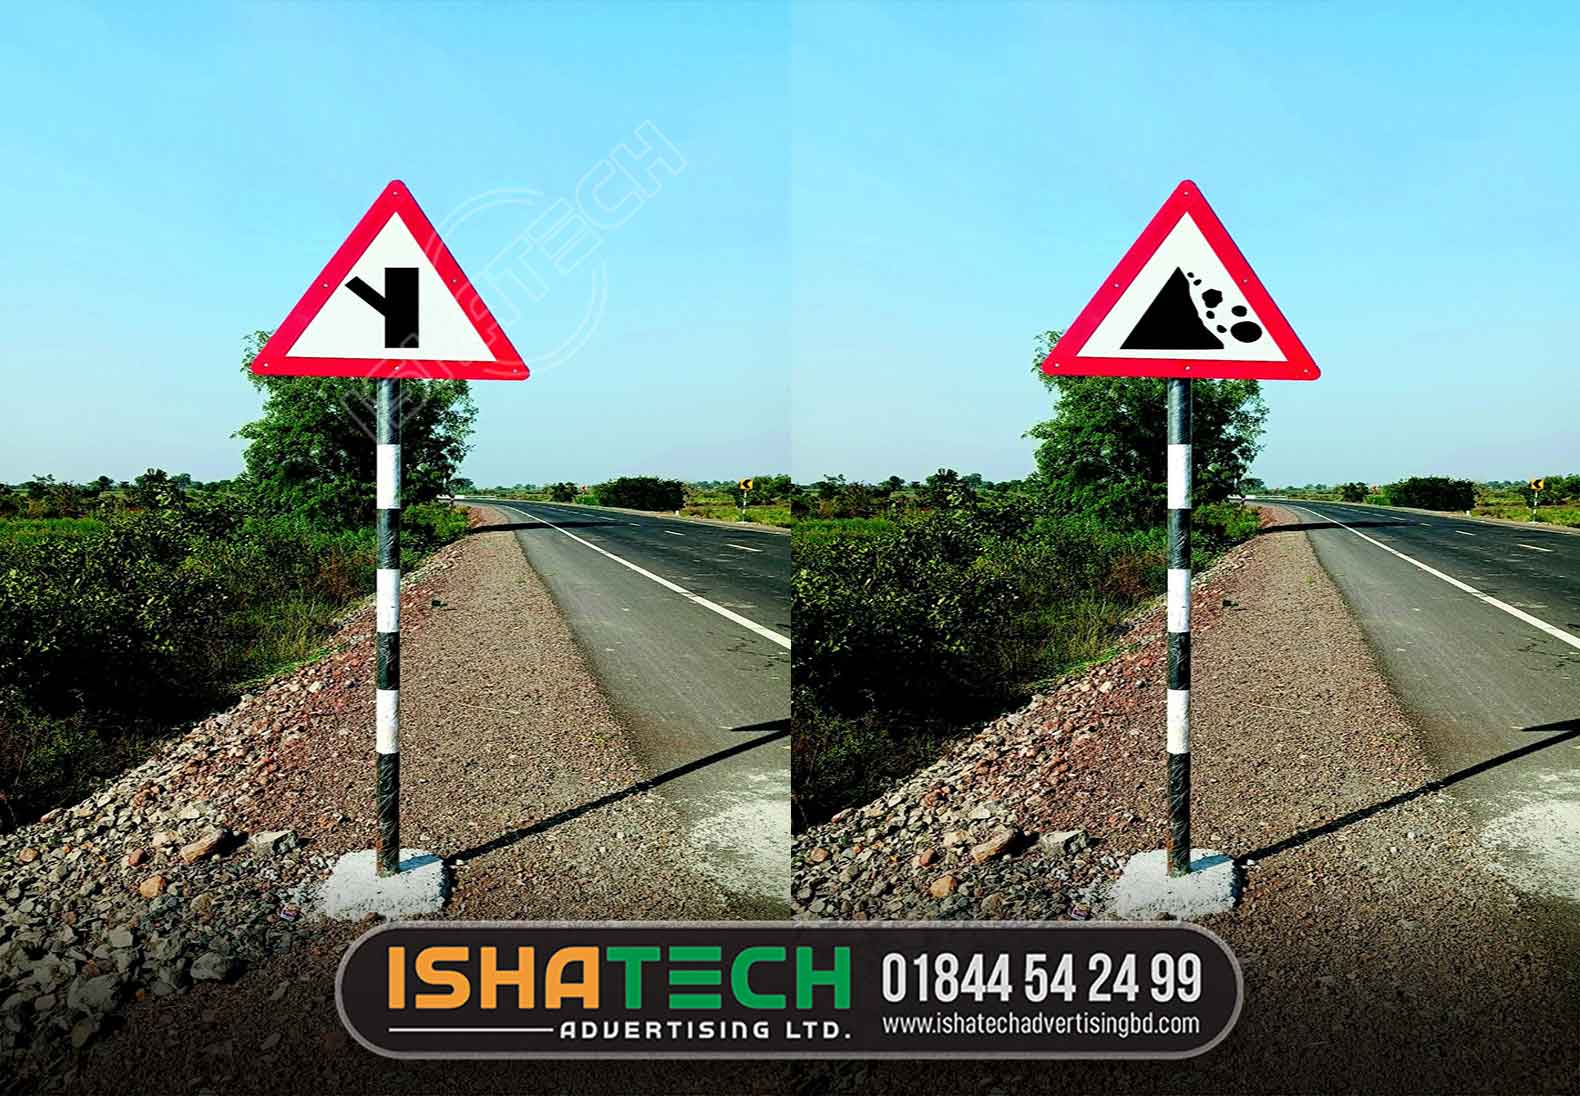 ROAD SIGN, TRAFFIC SIGN, METAL SIGN, TRAFFIC DIRECTIONAL SIGN